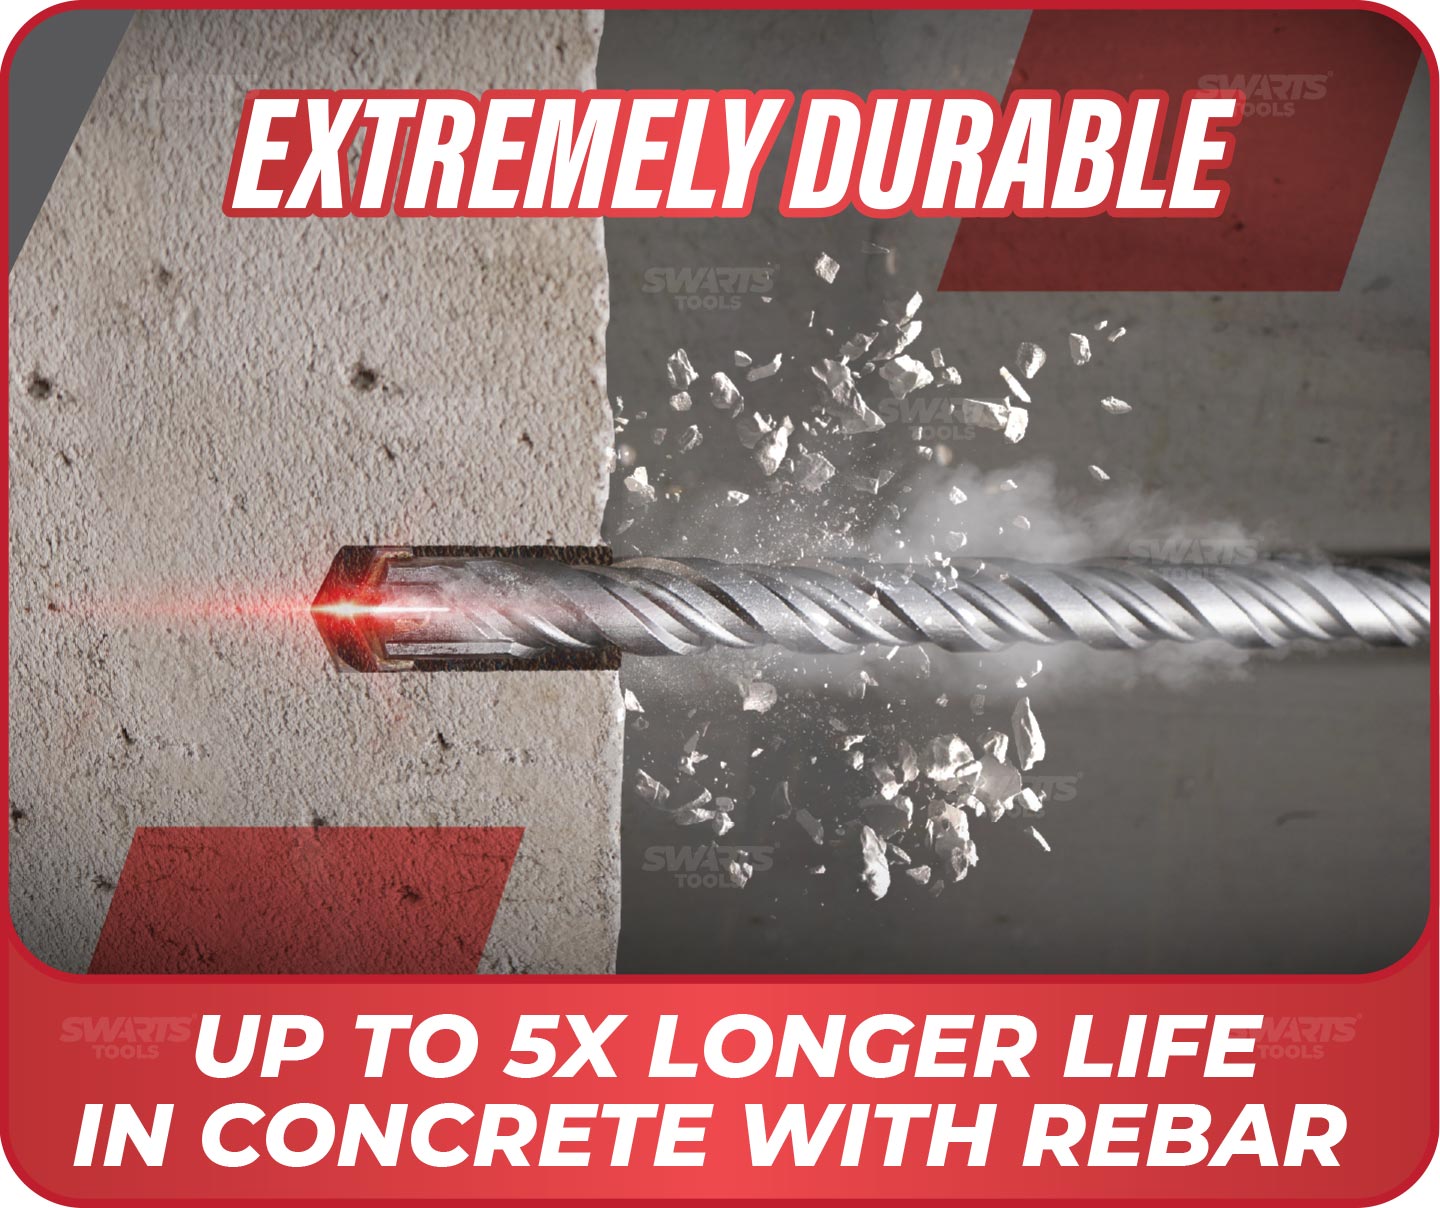 EXTREMELY DURABLE, UP TO 5X LONGER LIFE IN CONCRETE WITH REBAR